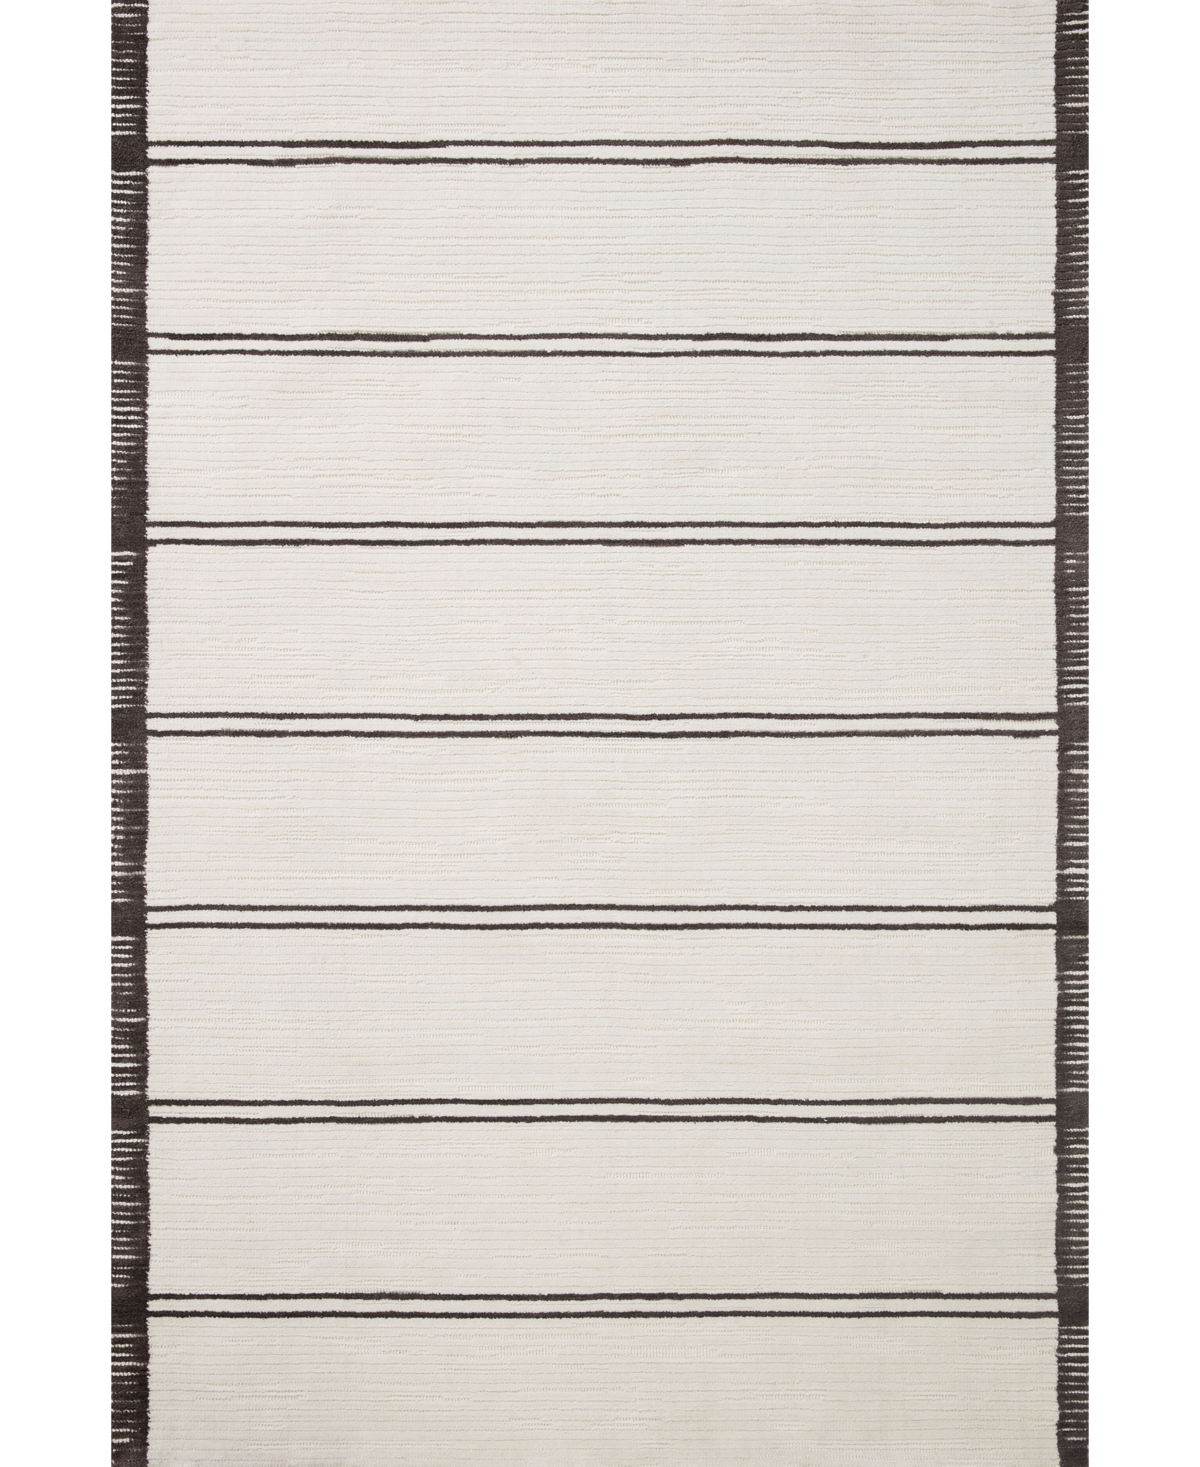 Magnolia Home By Joanna Gaines X Loloi Logan Log-02 8'6" X 12' Area Rug In White